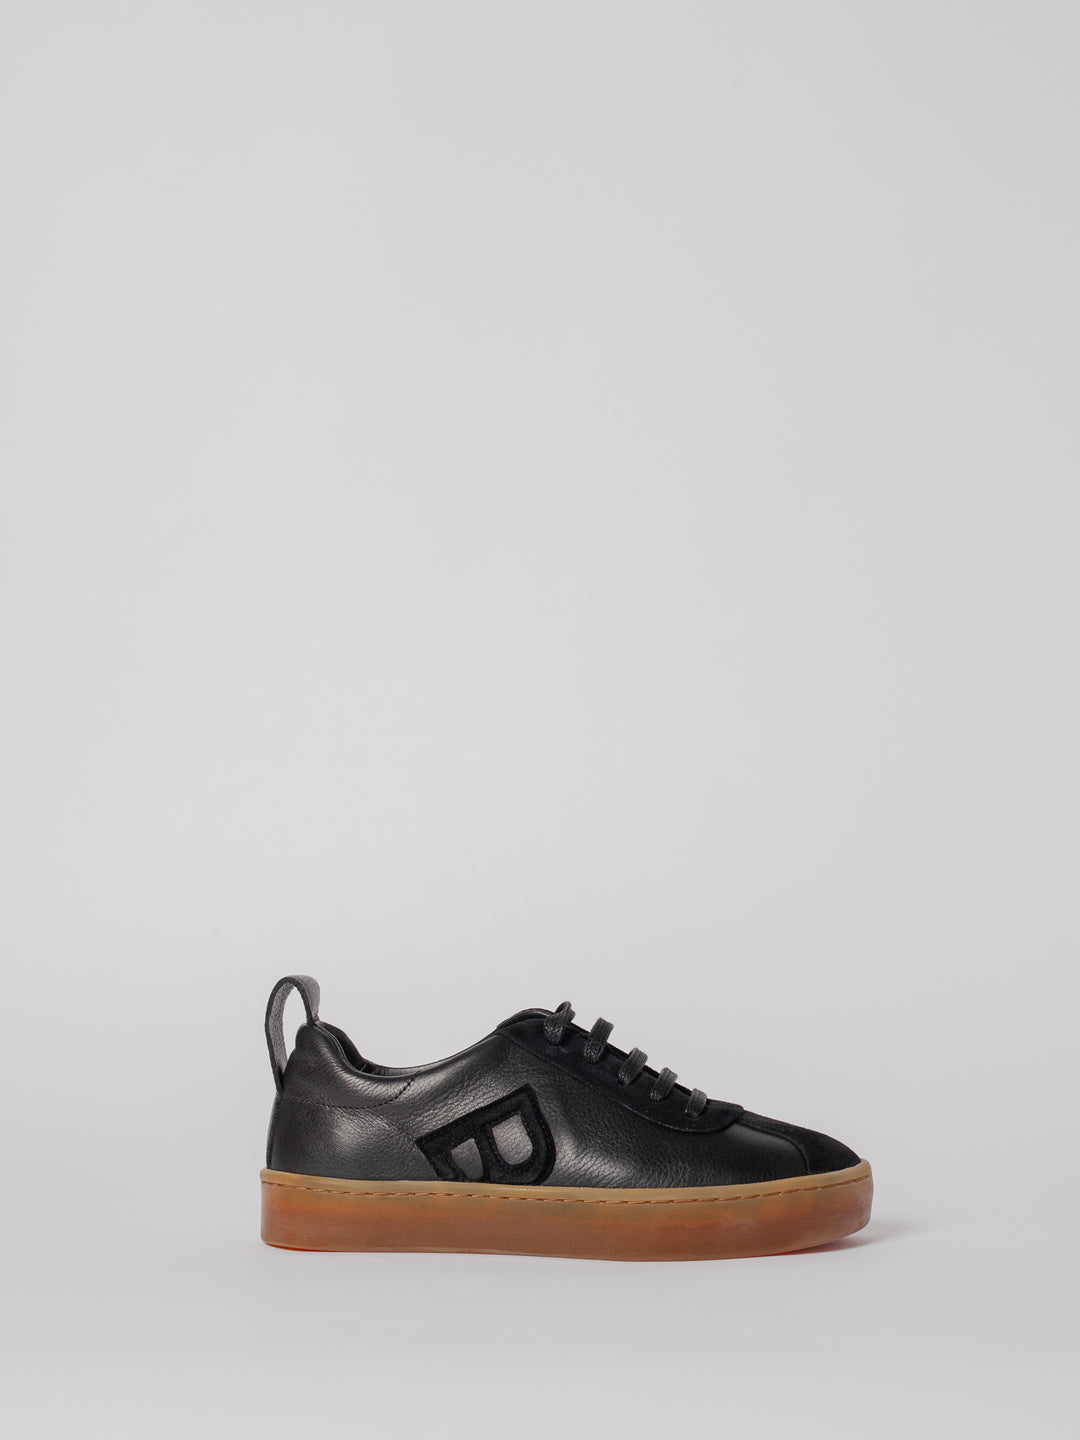 Blankens The Elin Black Sneaker with brown rubber sole and B-detail